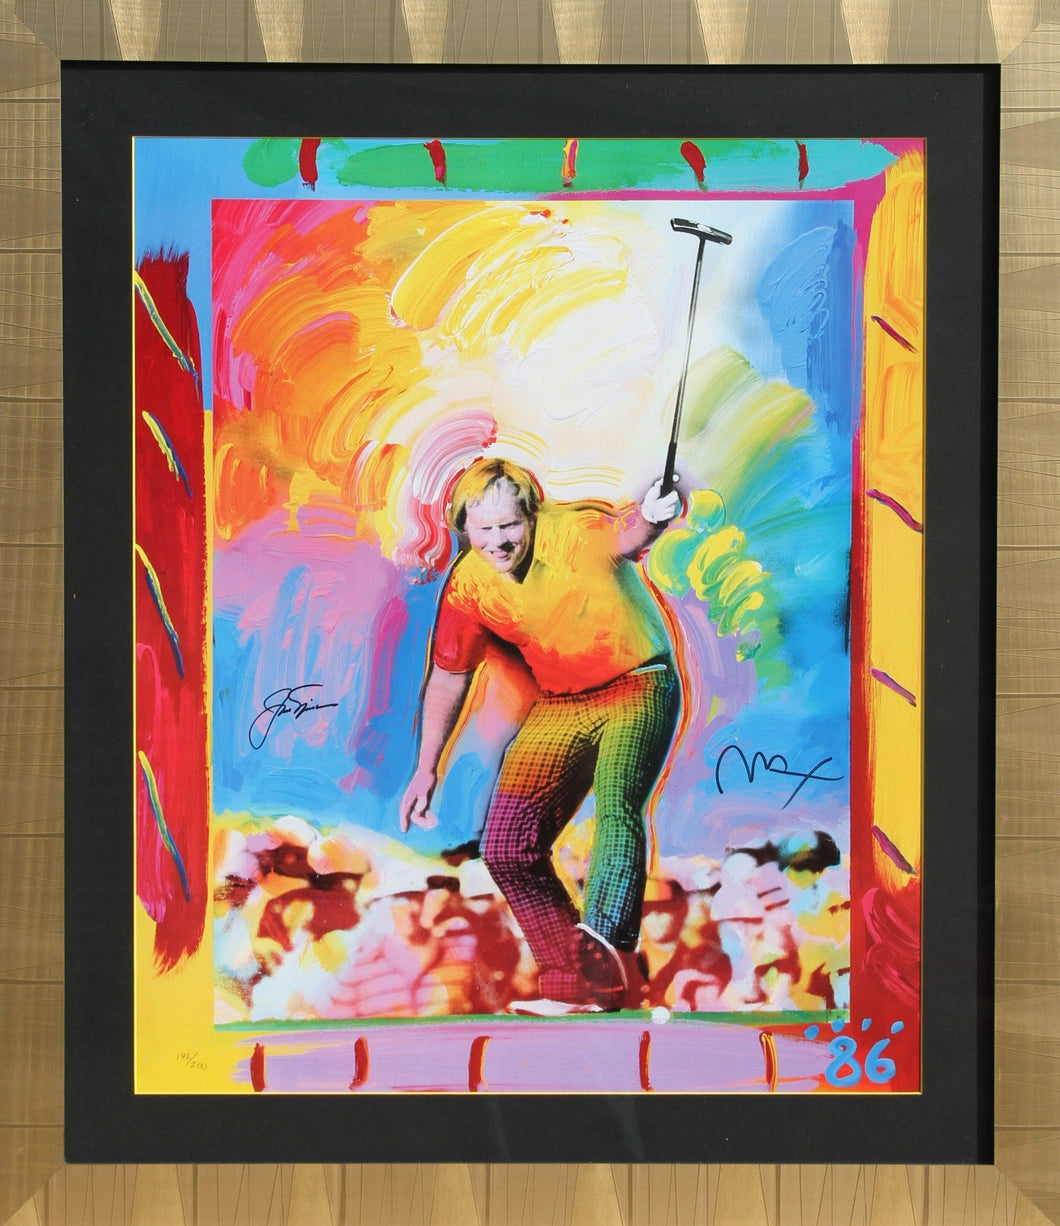 Jack Nicklaus Lithograph | Peter Max,{{product.type}}